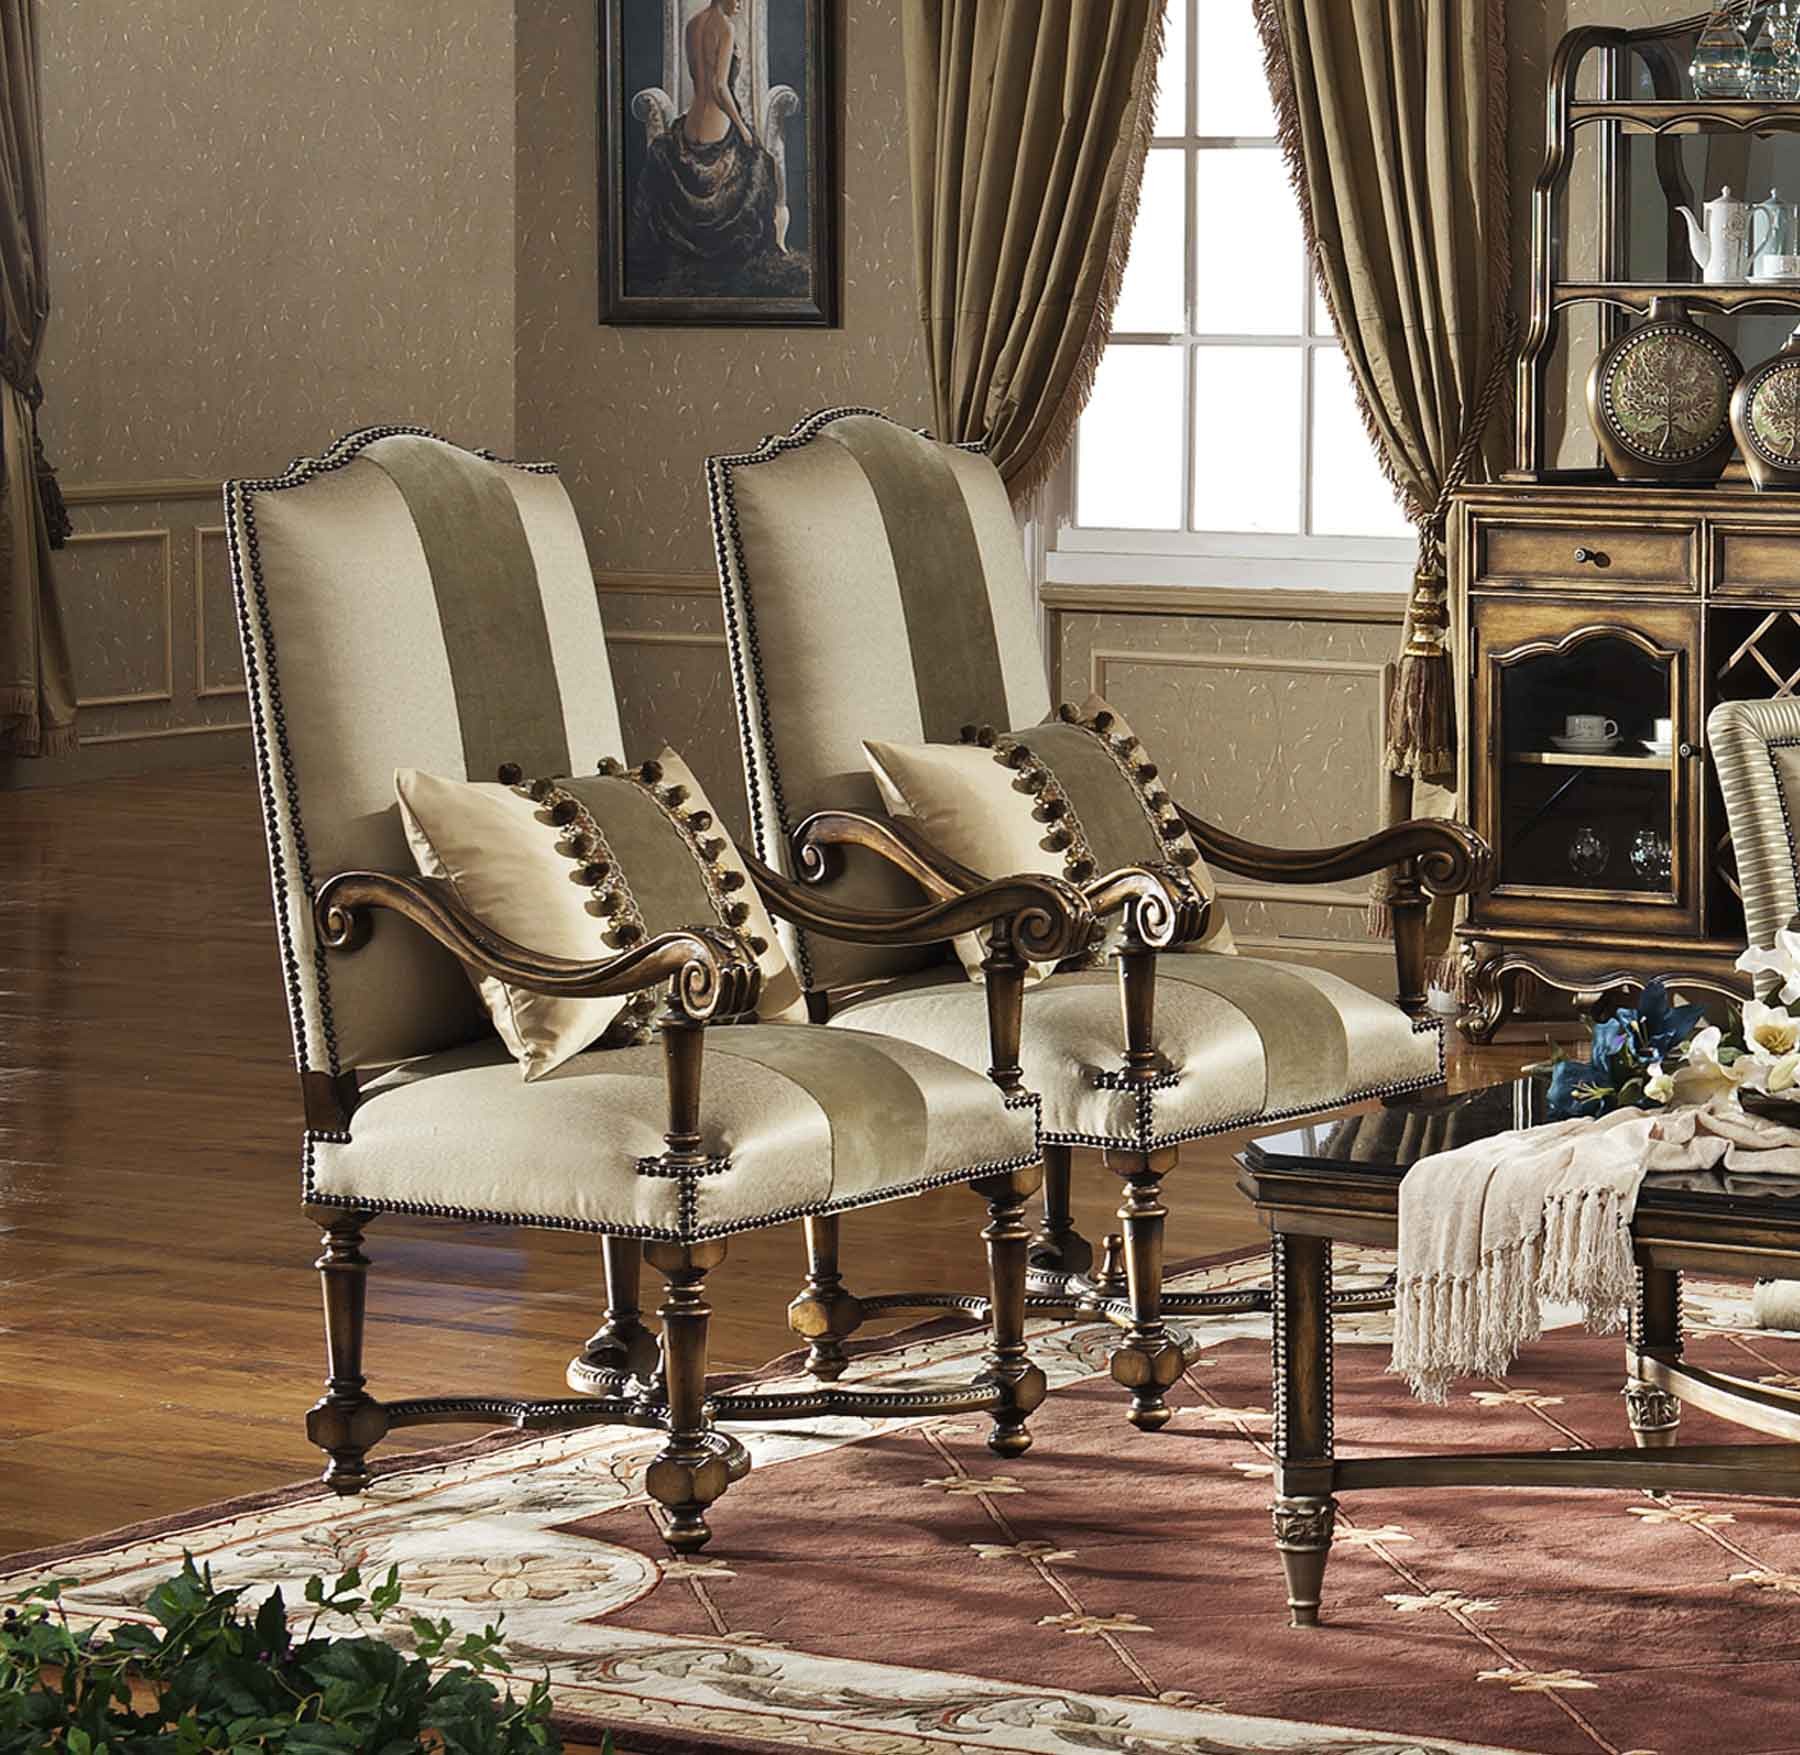 Wellesley Accent Chair shown in Parisian Bronze finish